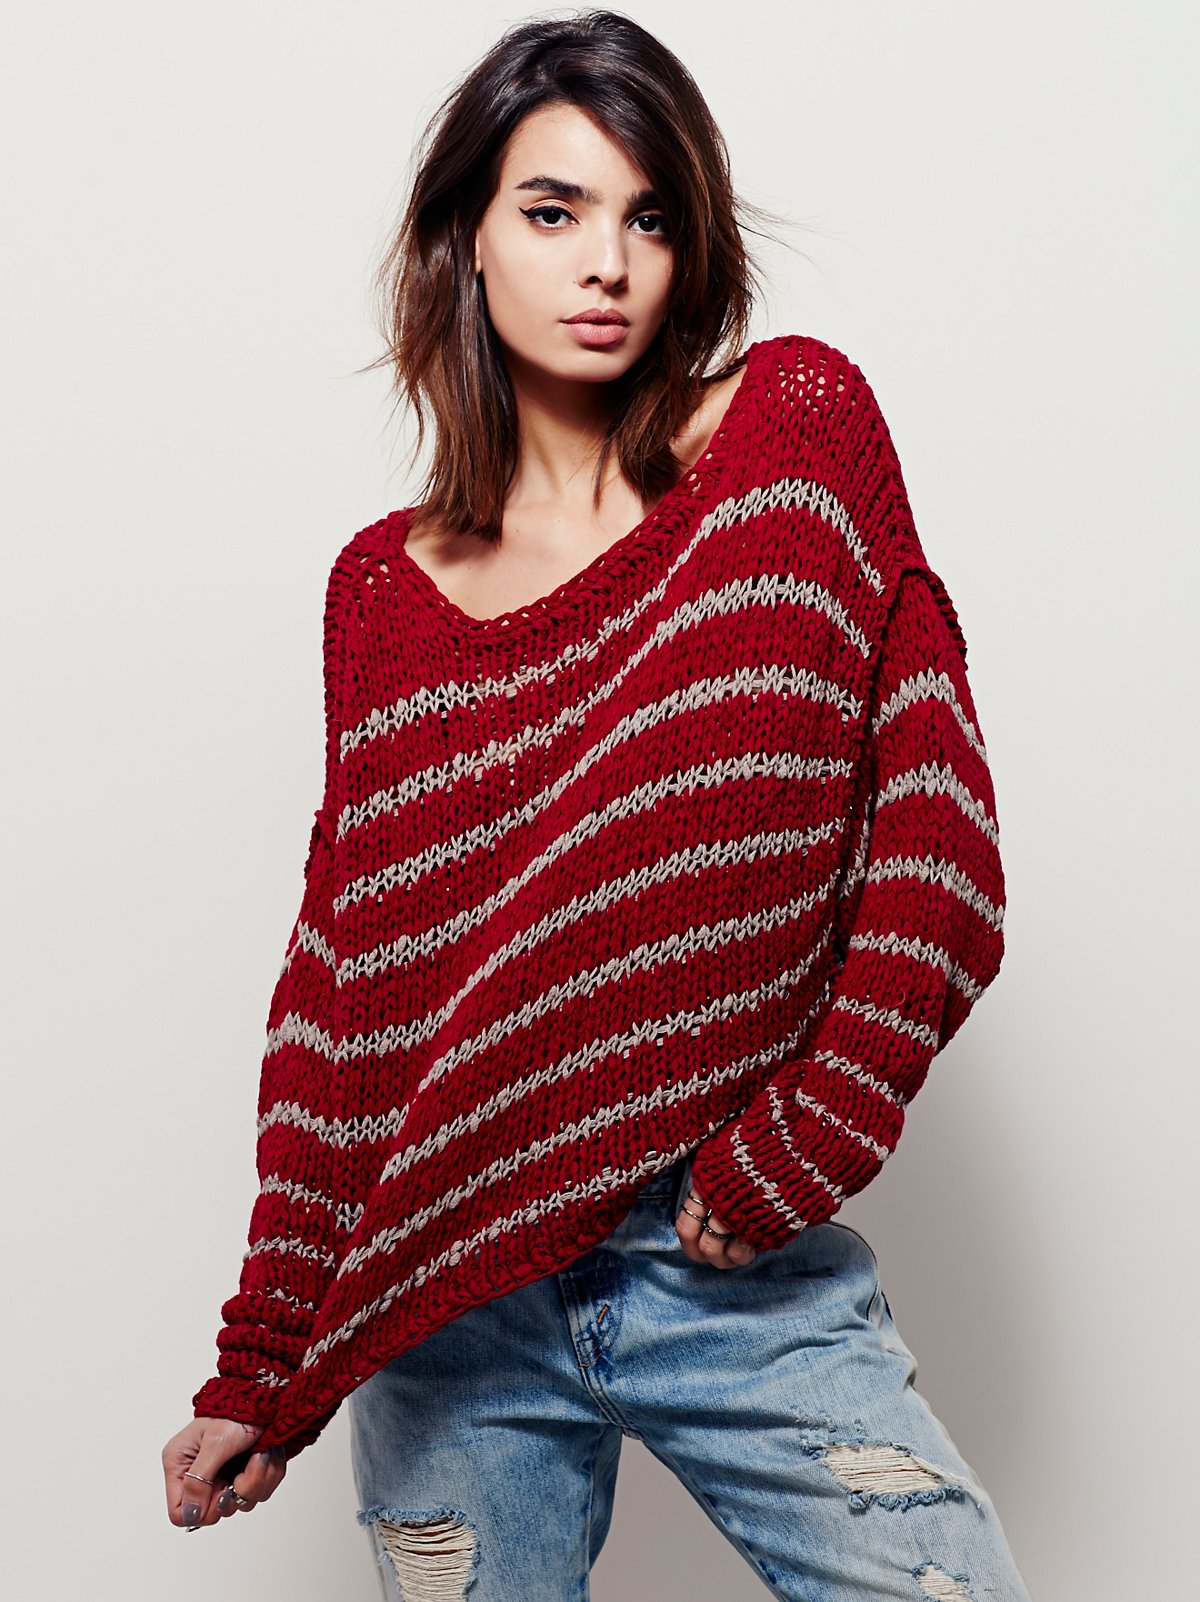 Over Easy Pullover at Free People Clothing Boutique